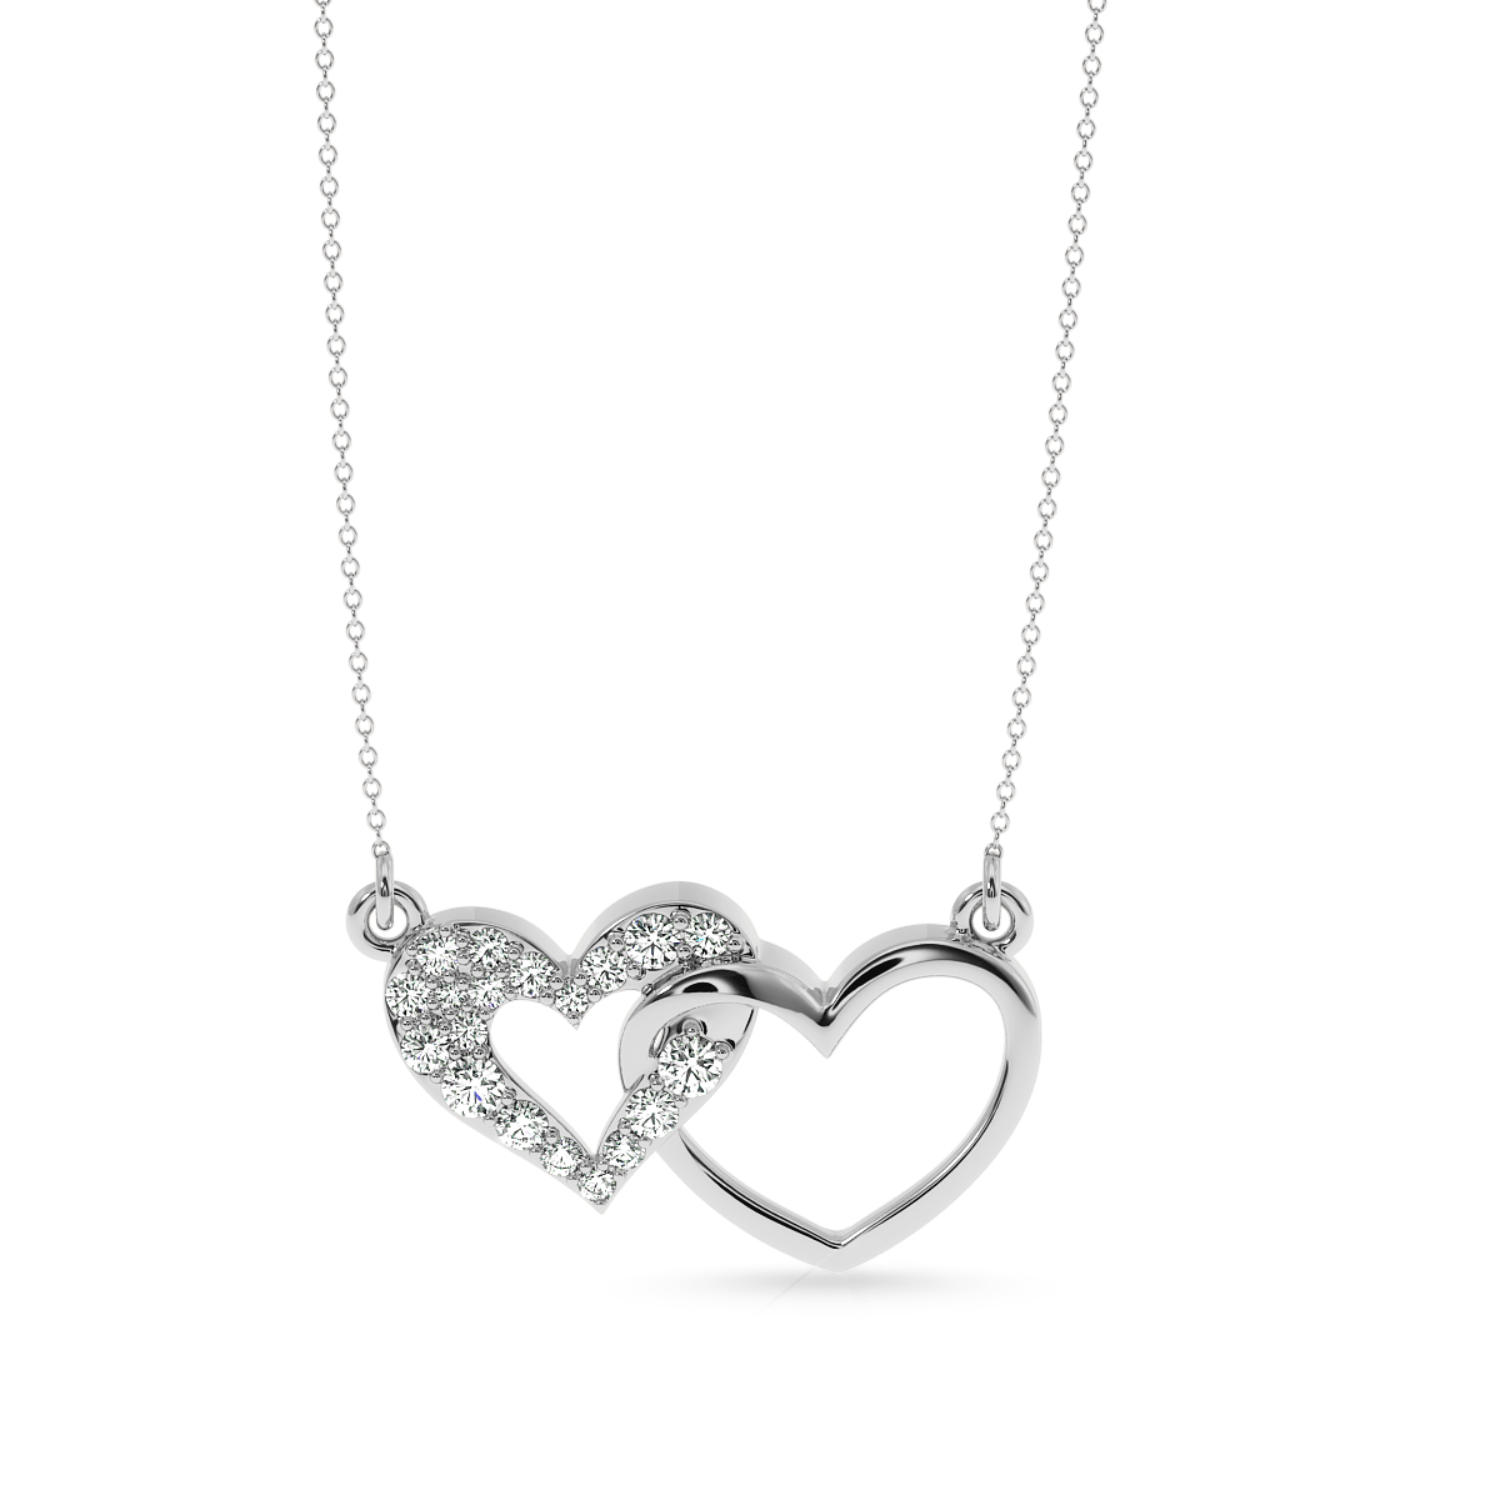 Linked Hearts Diamond Pendant with Chain